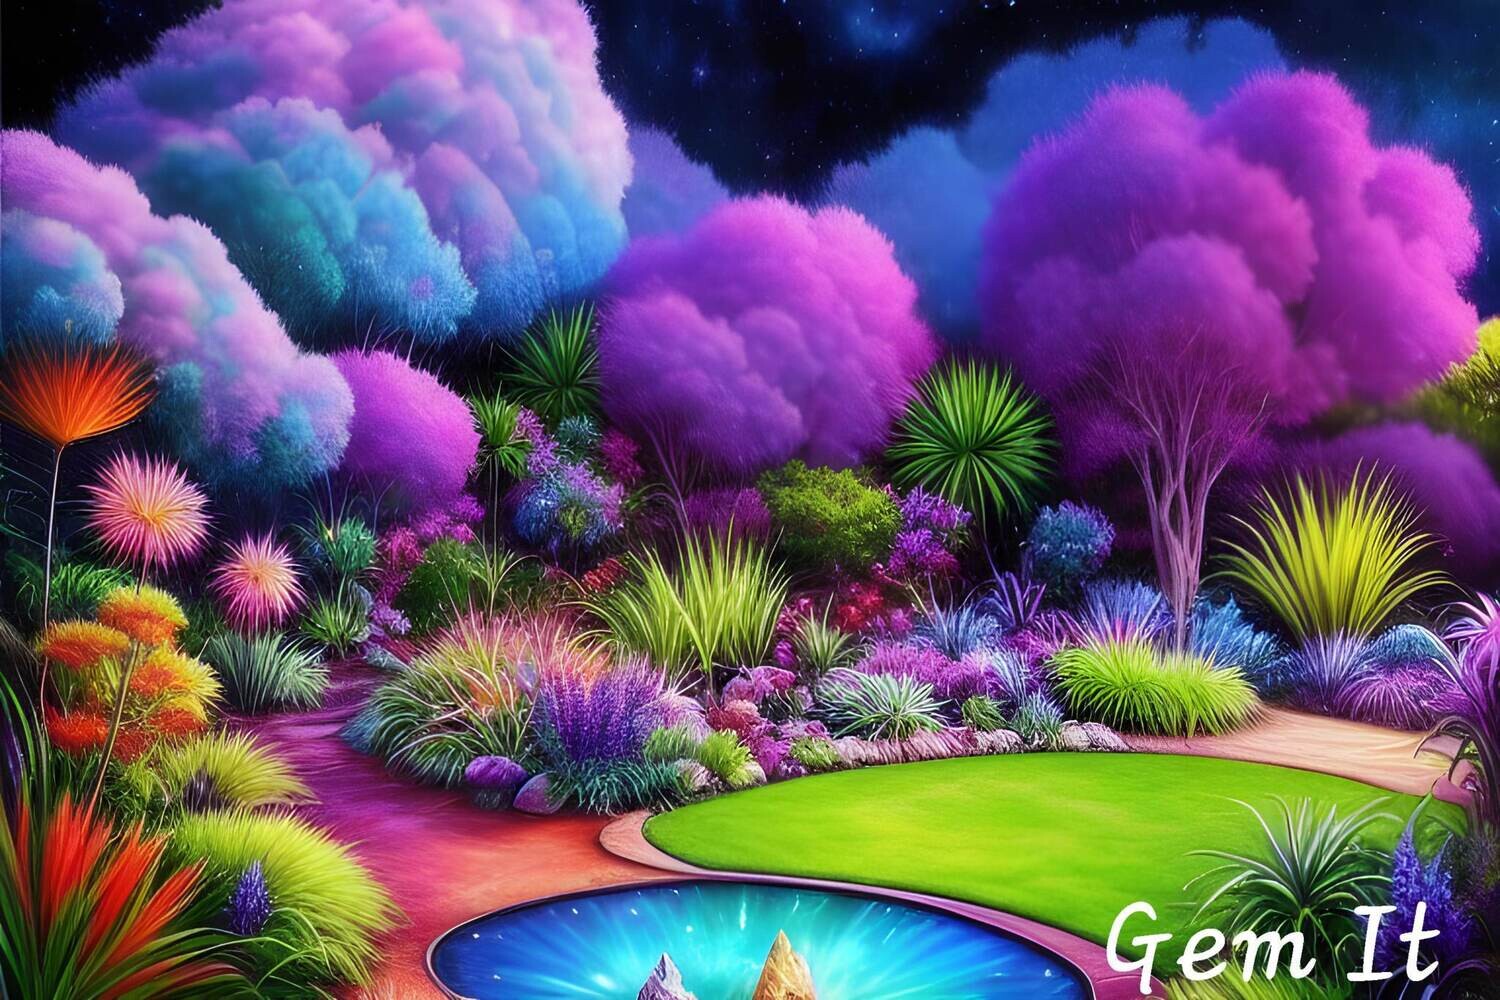 Fantasy Garden 891 - Specially ordered for you. Delivery is approximately 4 - 6 weeks.